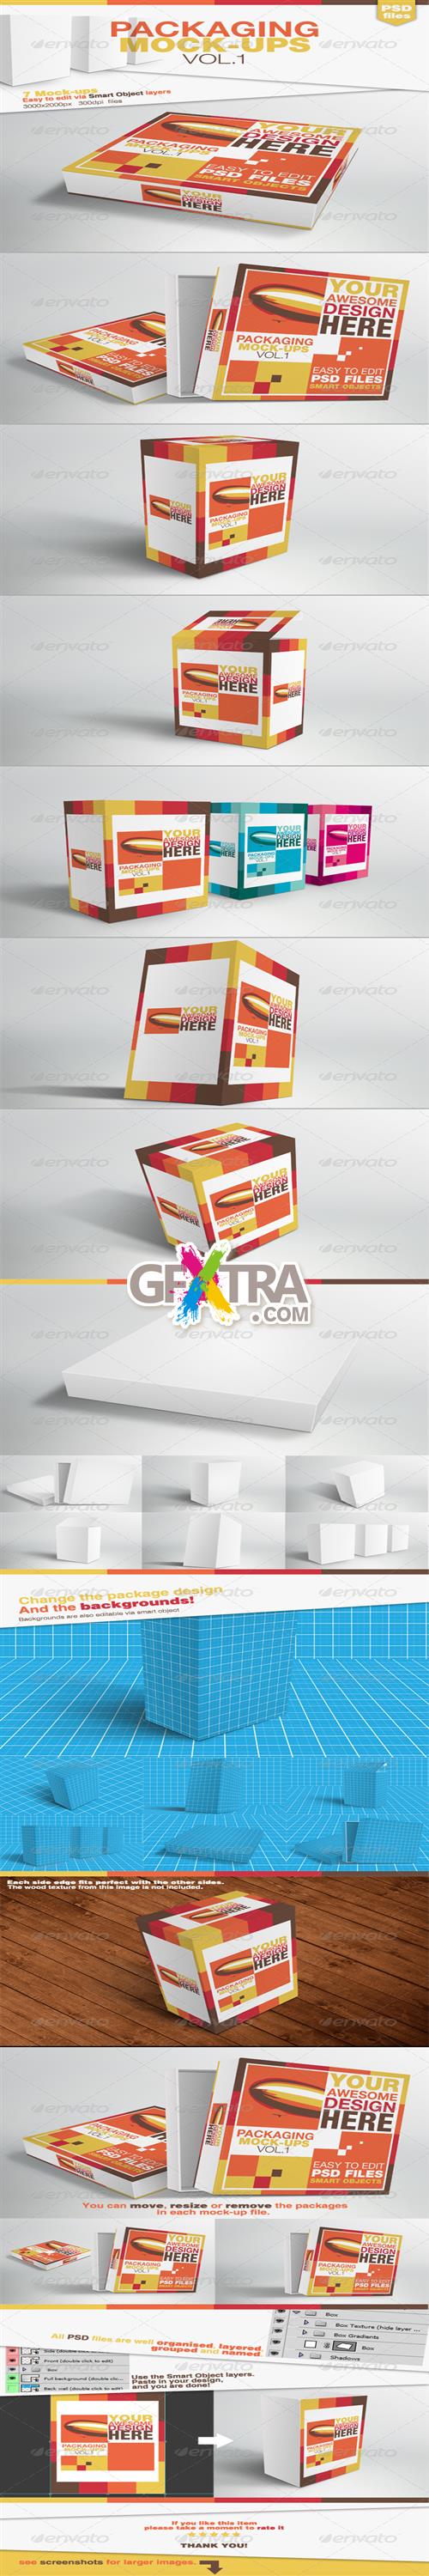 GraphicRiver Packaging Mock-ups Vol.1 6211909